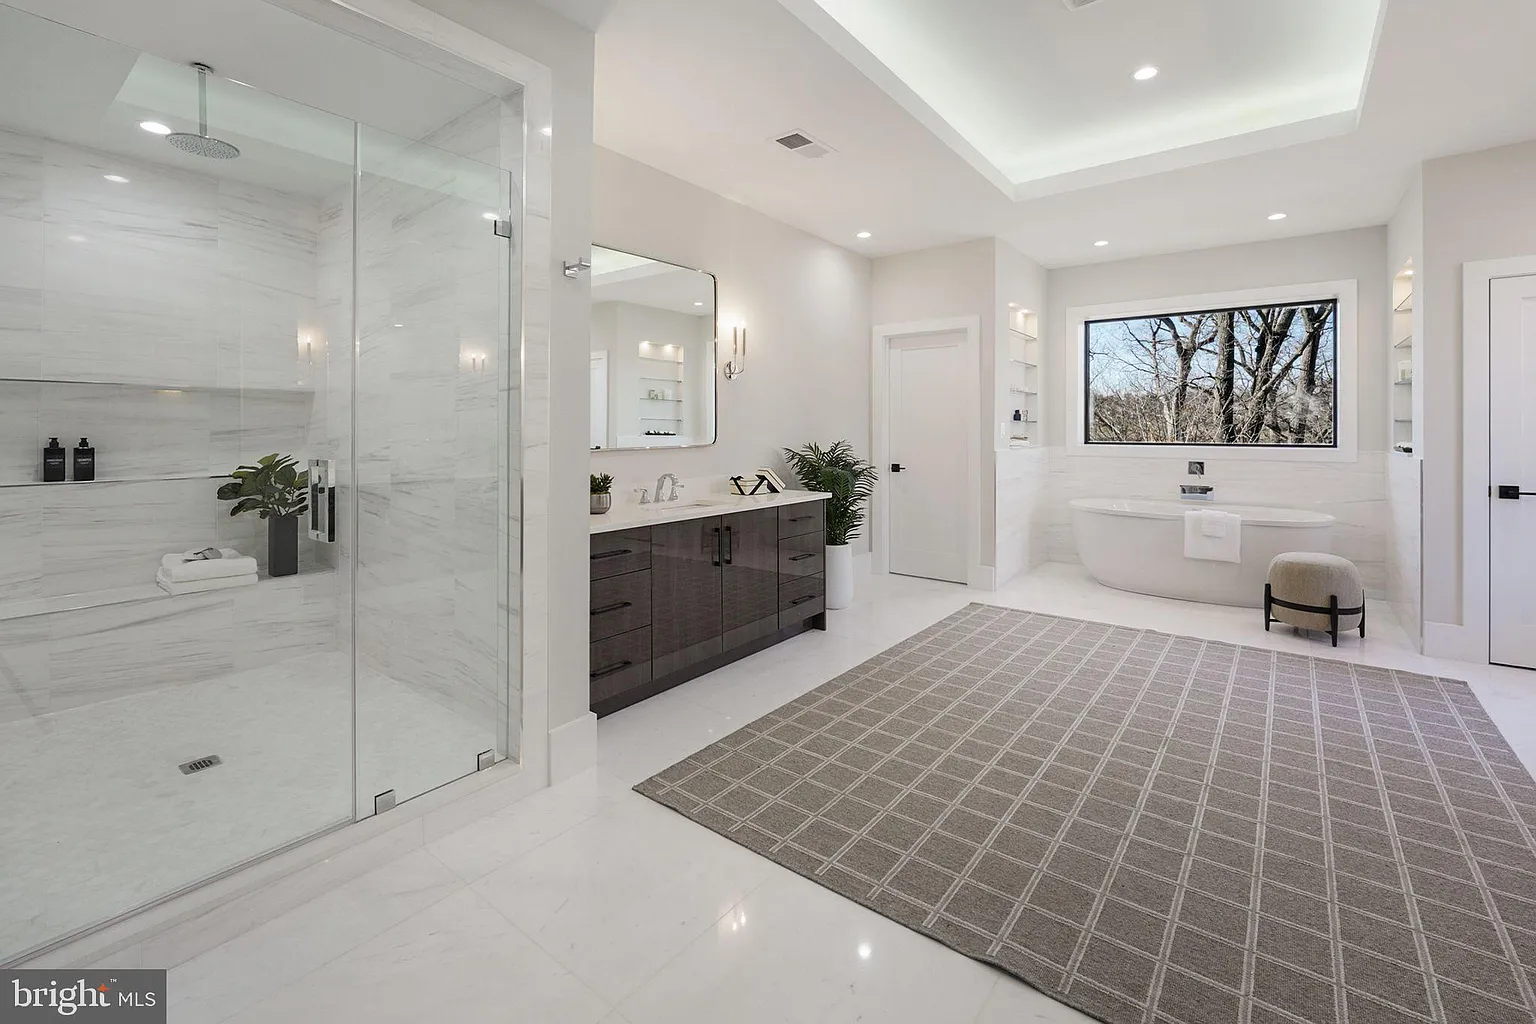 view of home's primary bathroom with glass doored shower and spa bath under bathroom window